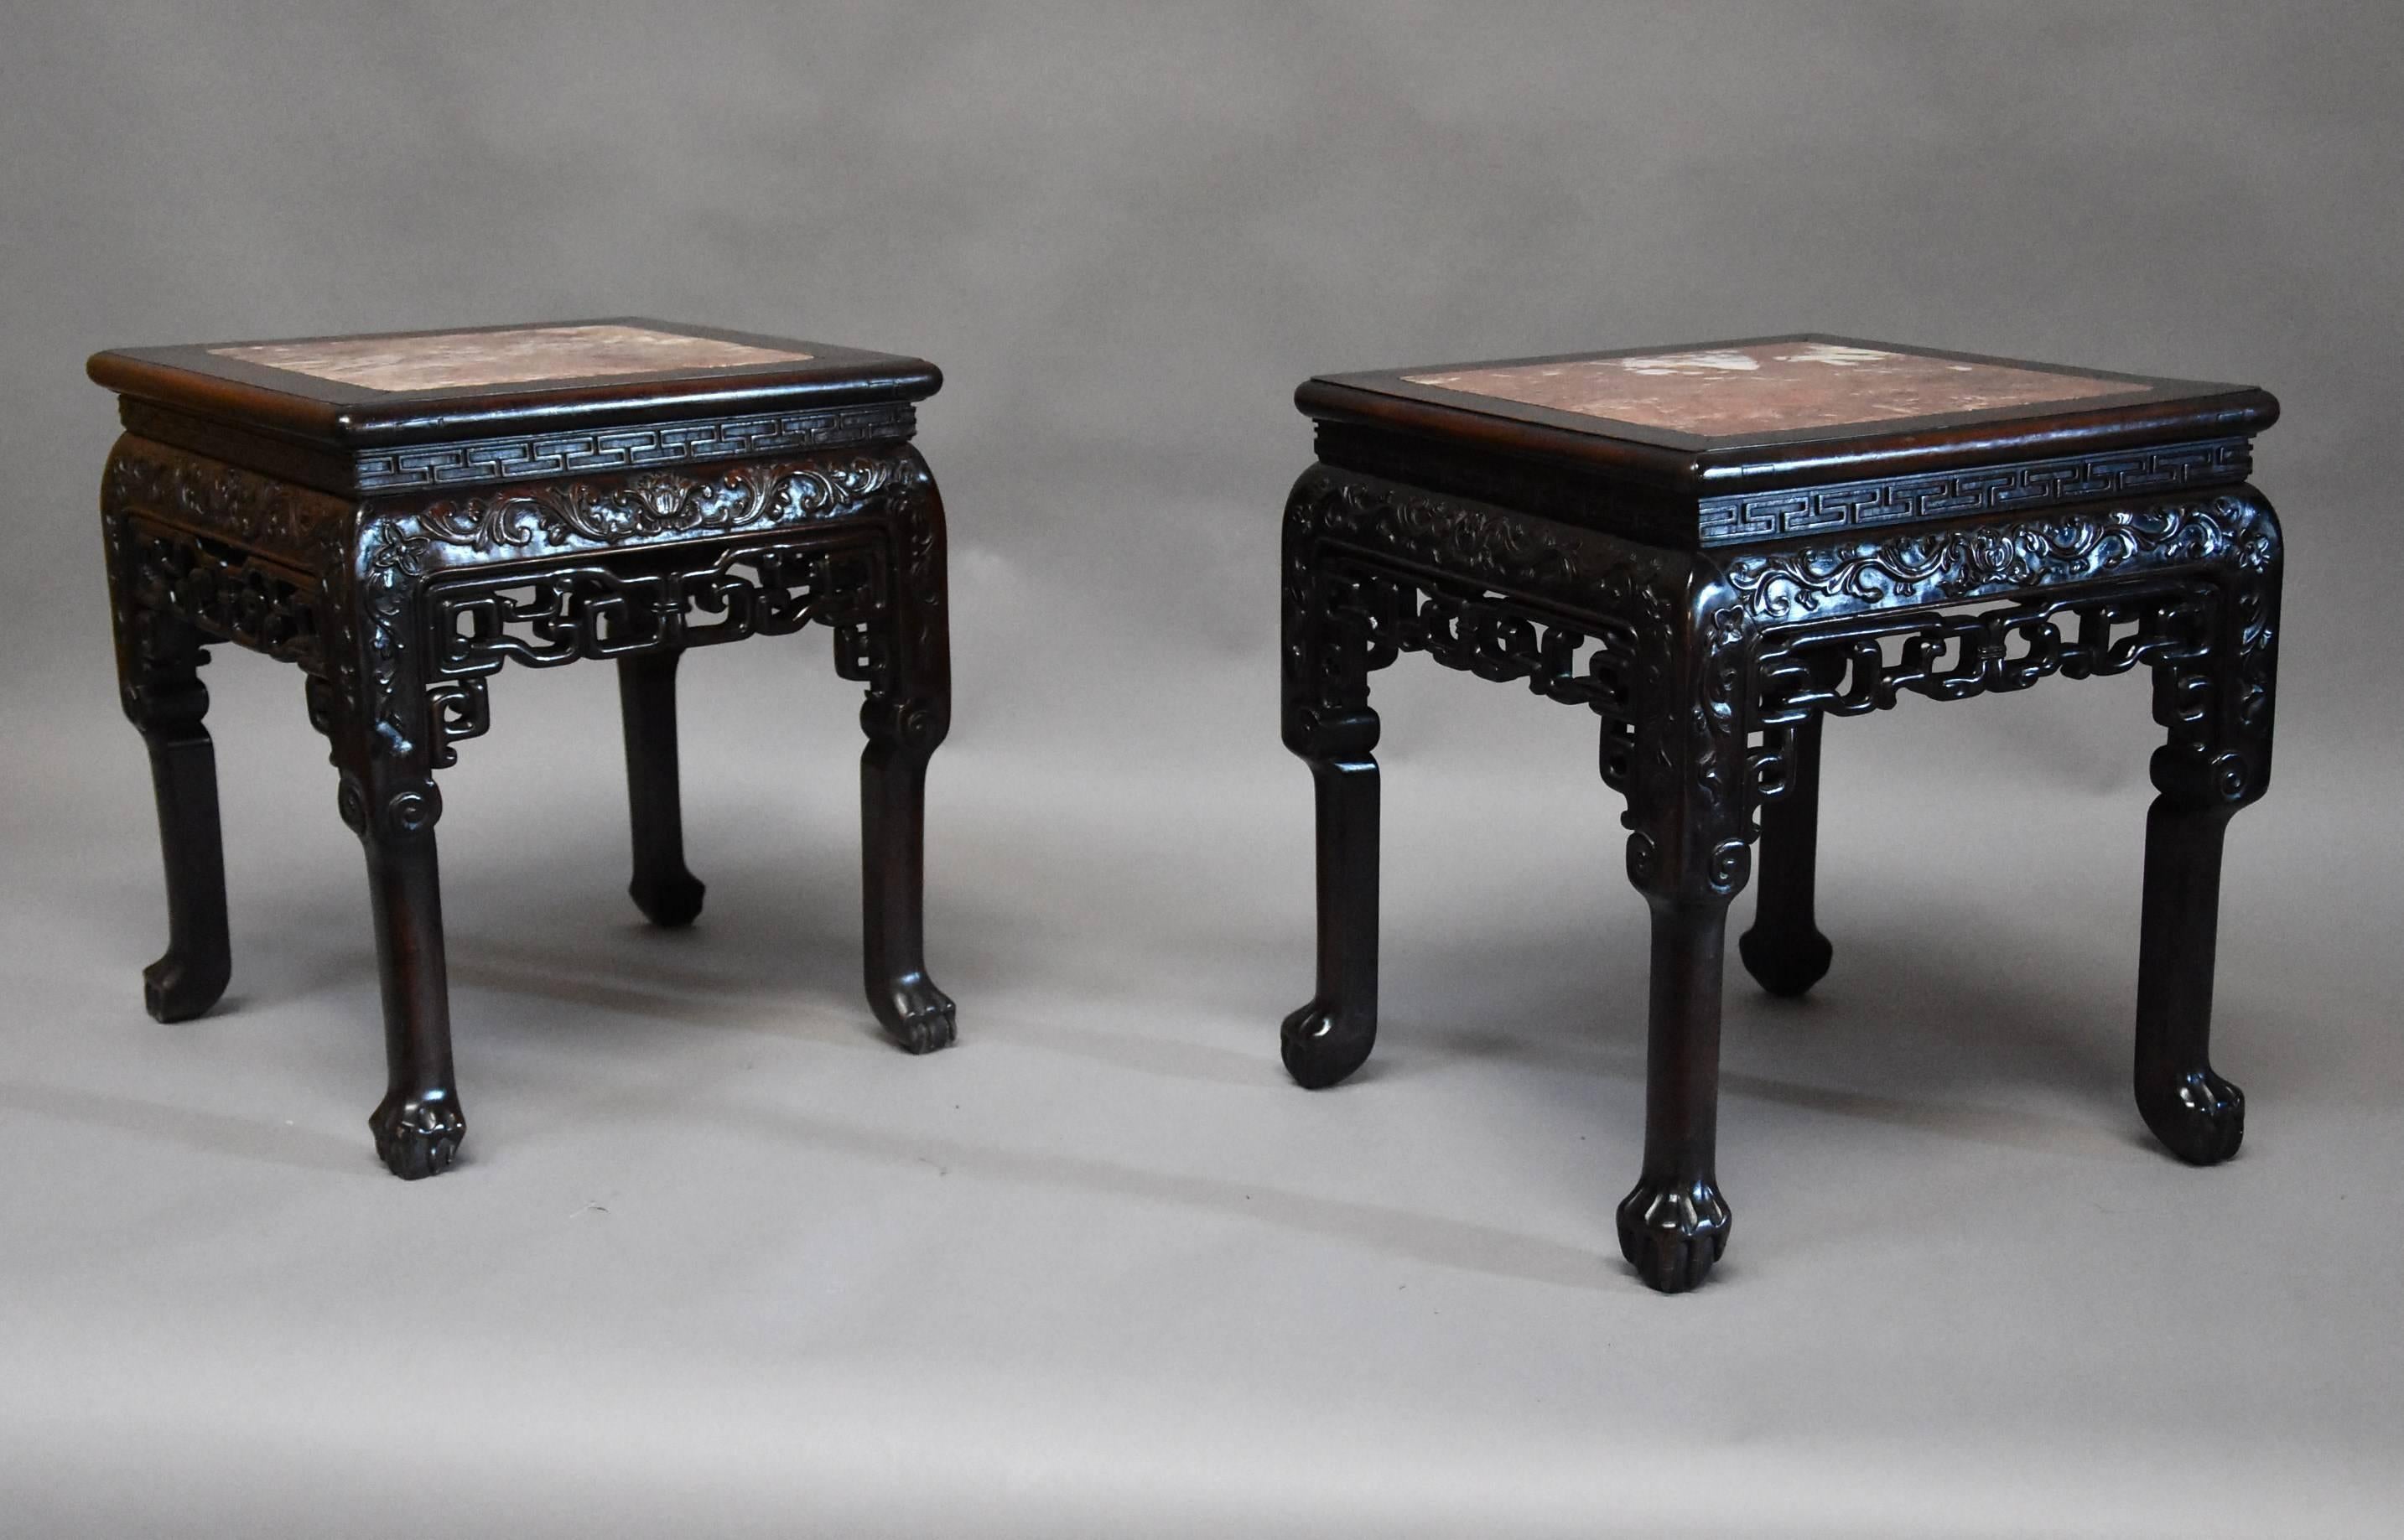 A late 19th century matched pair of Chinese hardwood square pot stands.

These pot stands consist of a rouge marble inset top with a hardwood banding surrounding it leading down to a moulded edge with geometric carved decoration below.

This